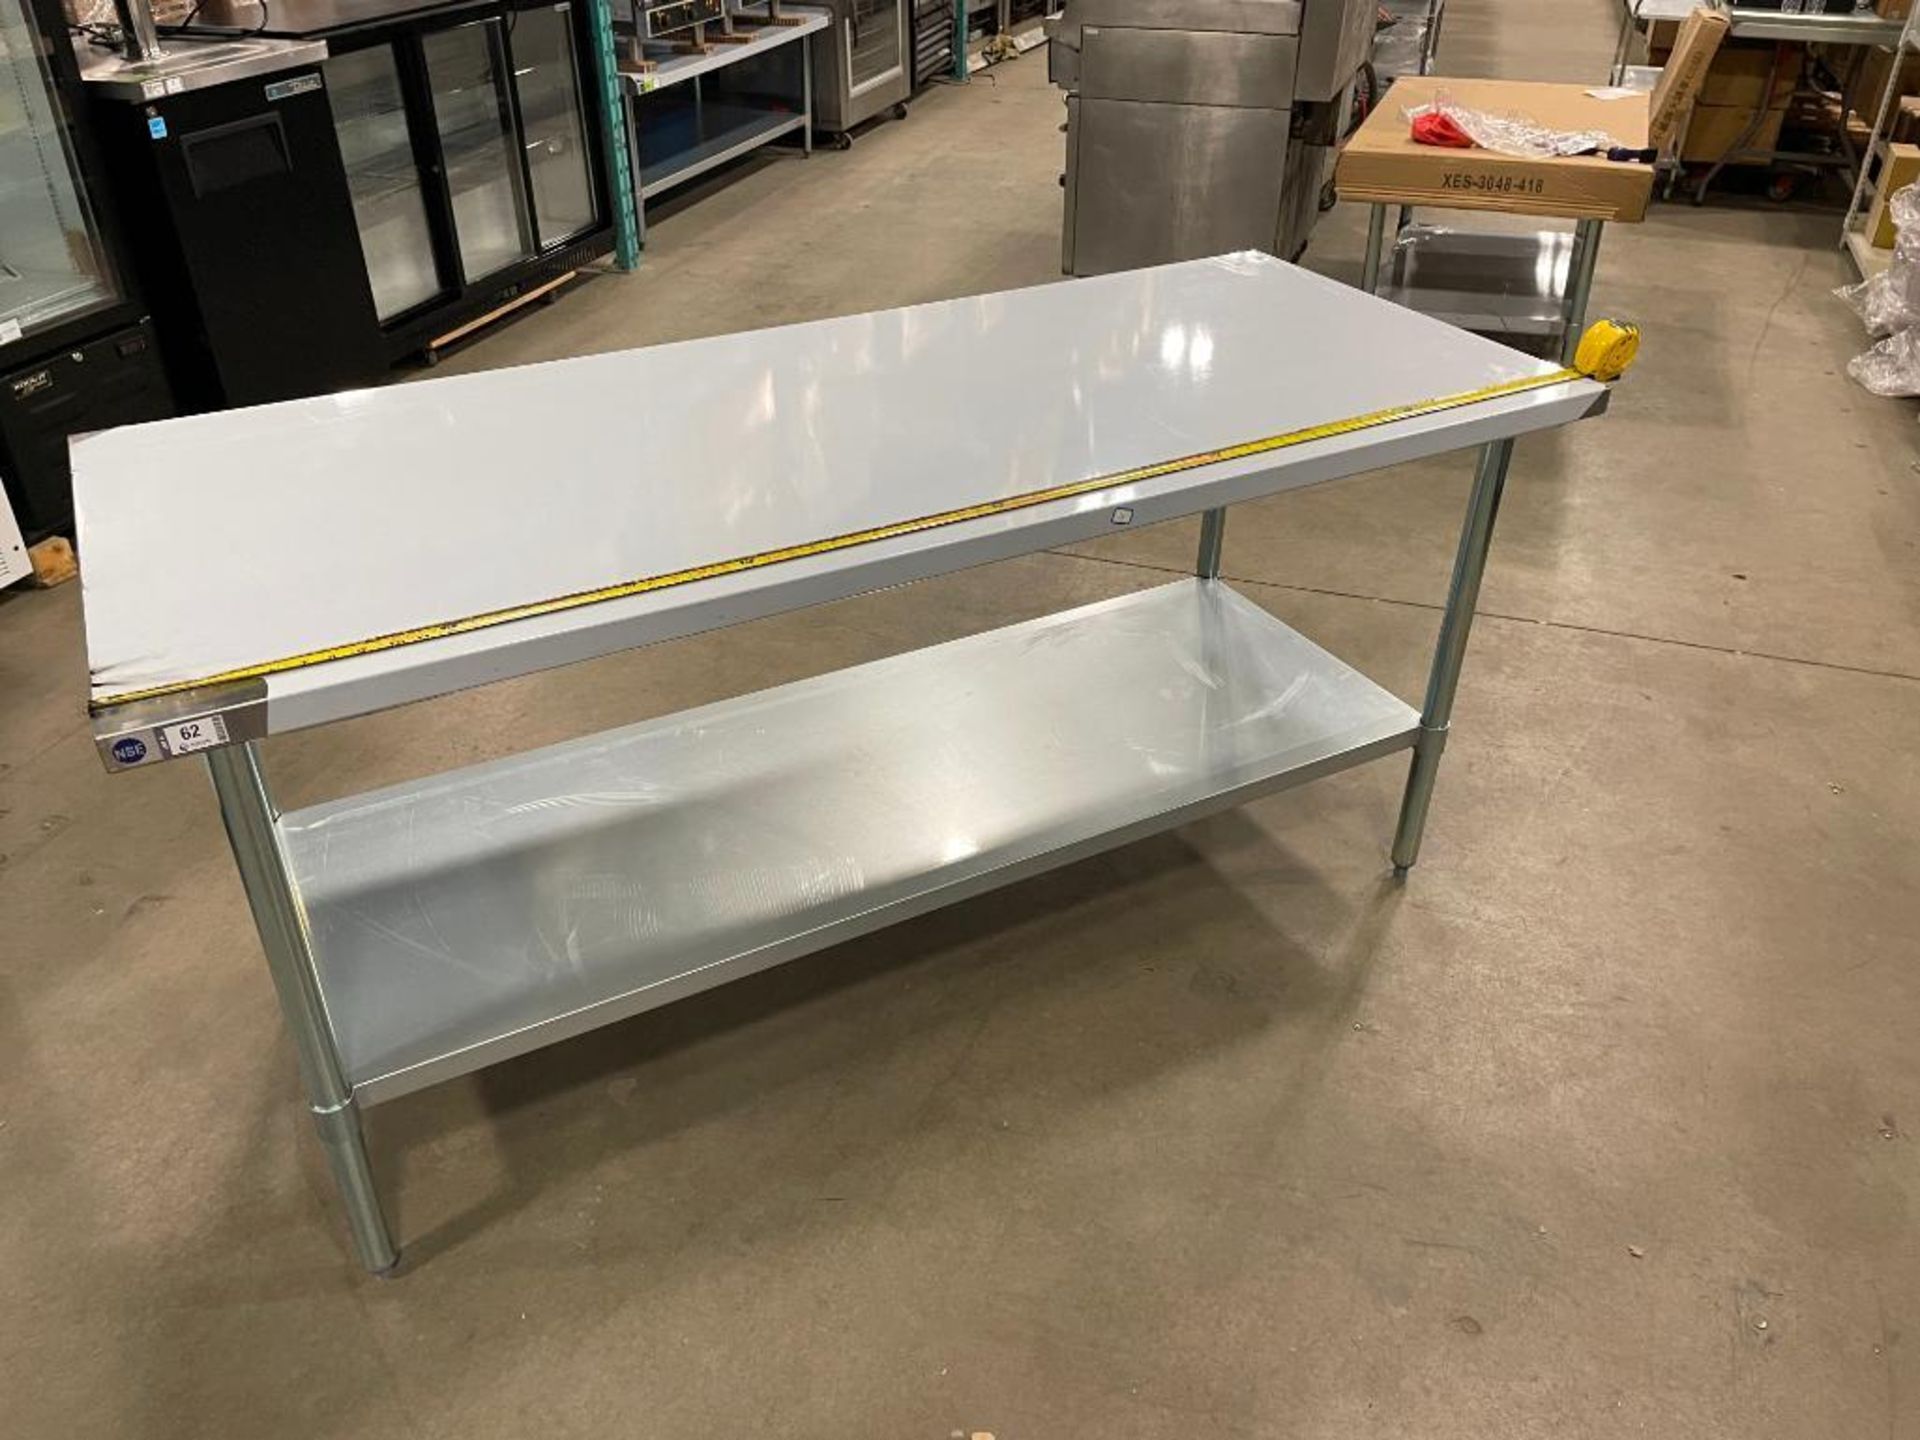 NEW 30" X 72" STAINLESS STEEL WORK TABLE WITH UNDERSHELF - Image 4 of 10